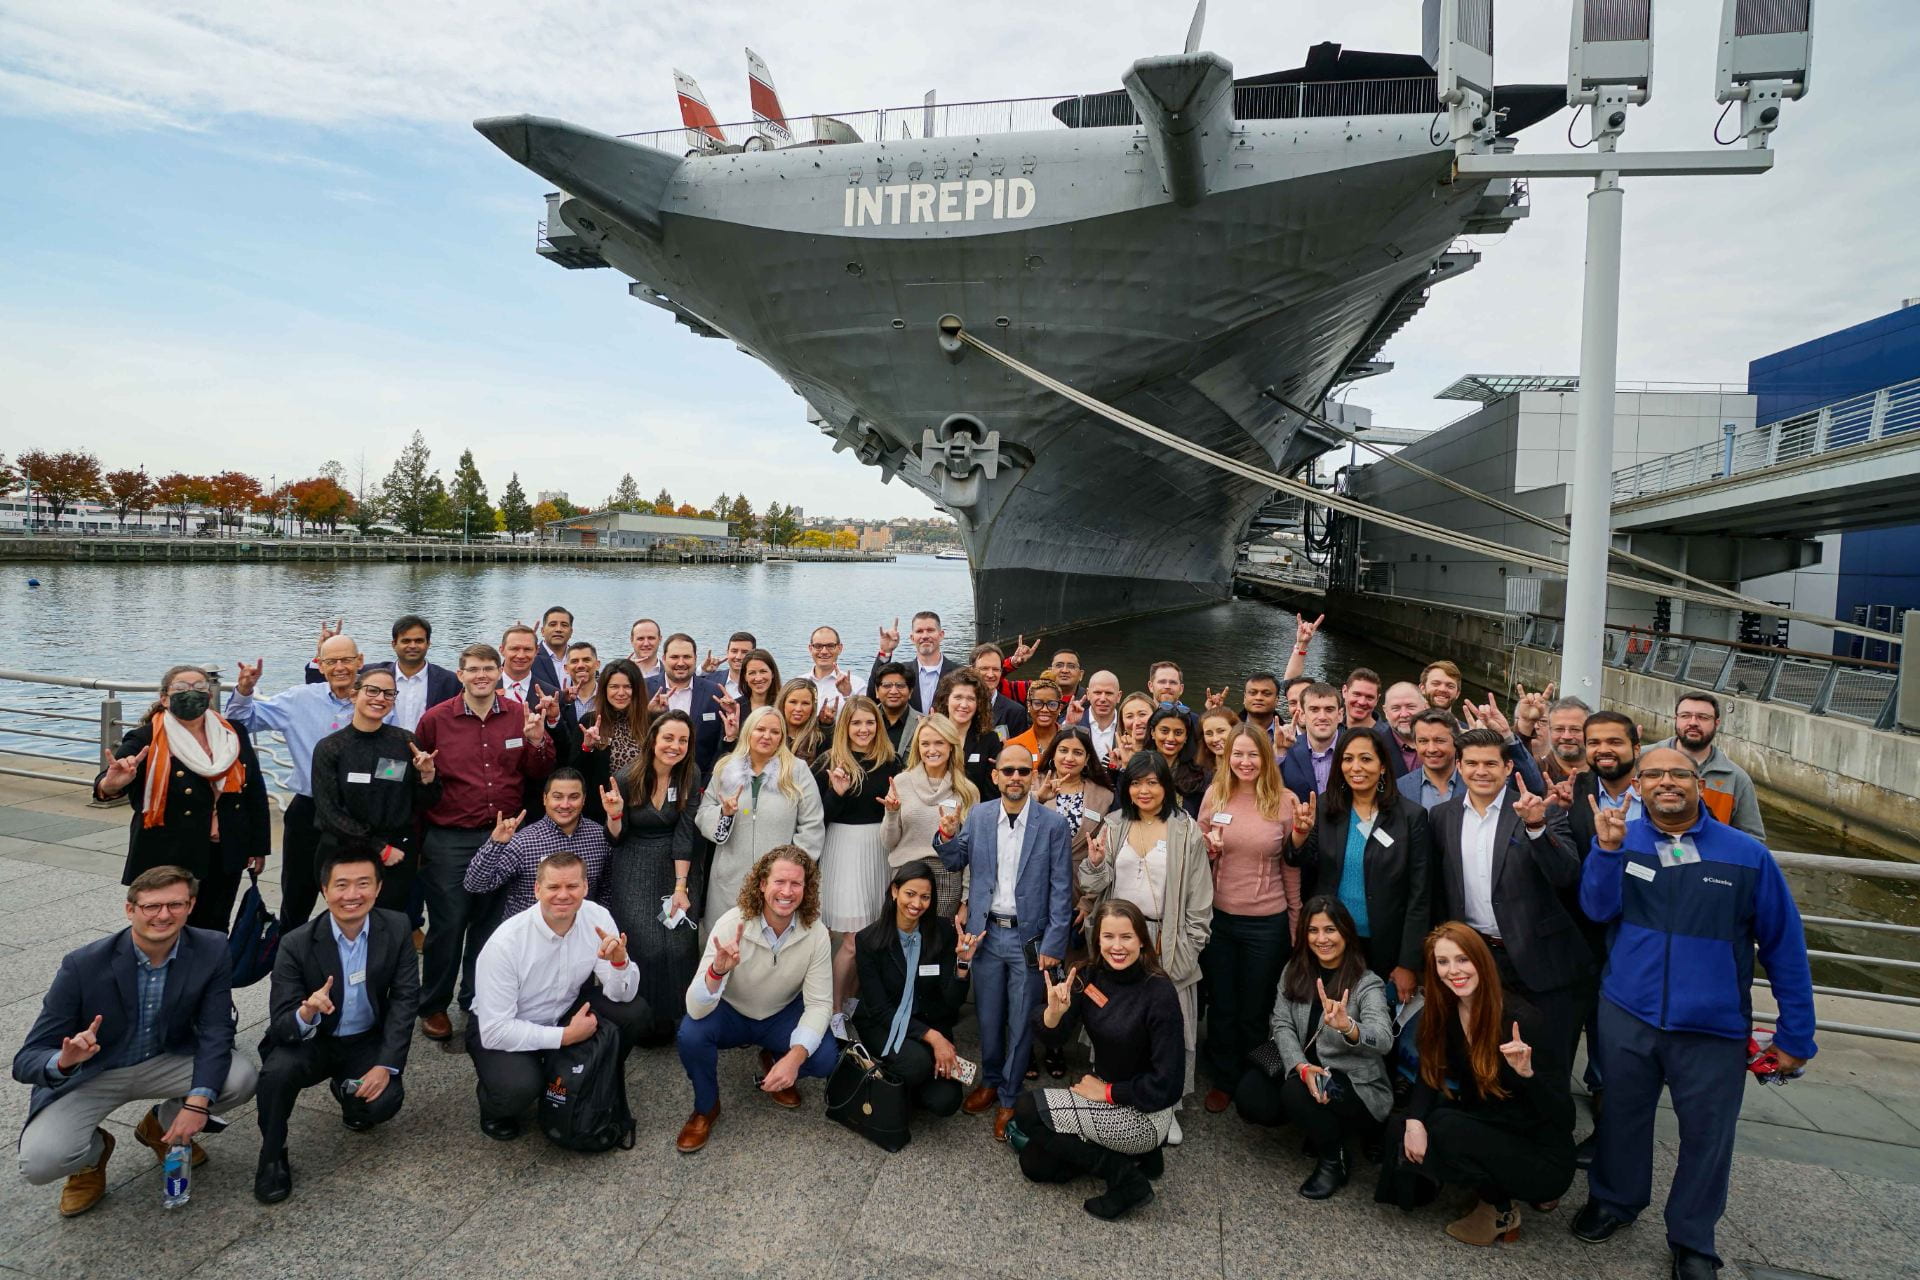 students standing in front of the Intrepid ship